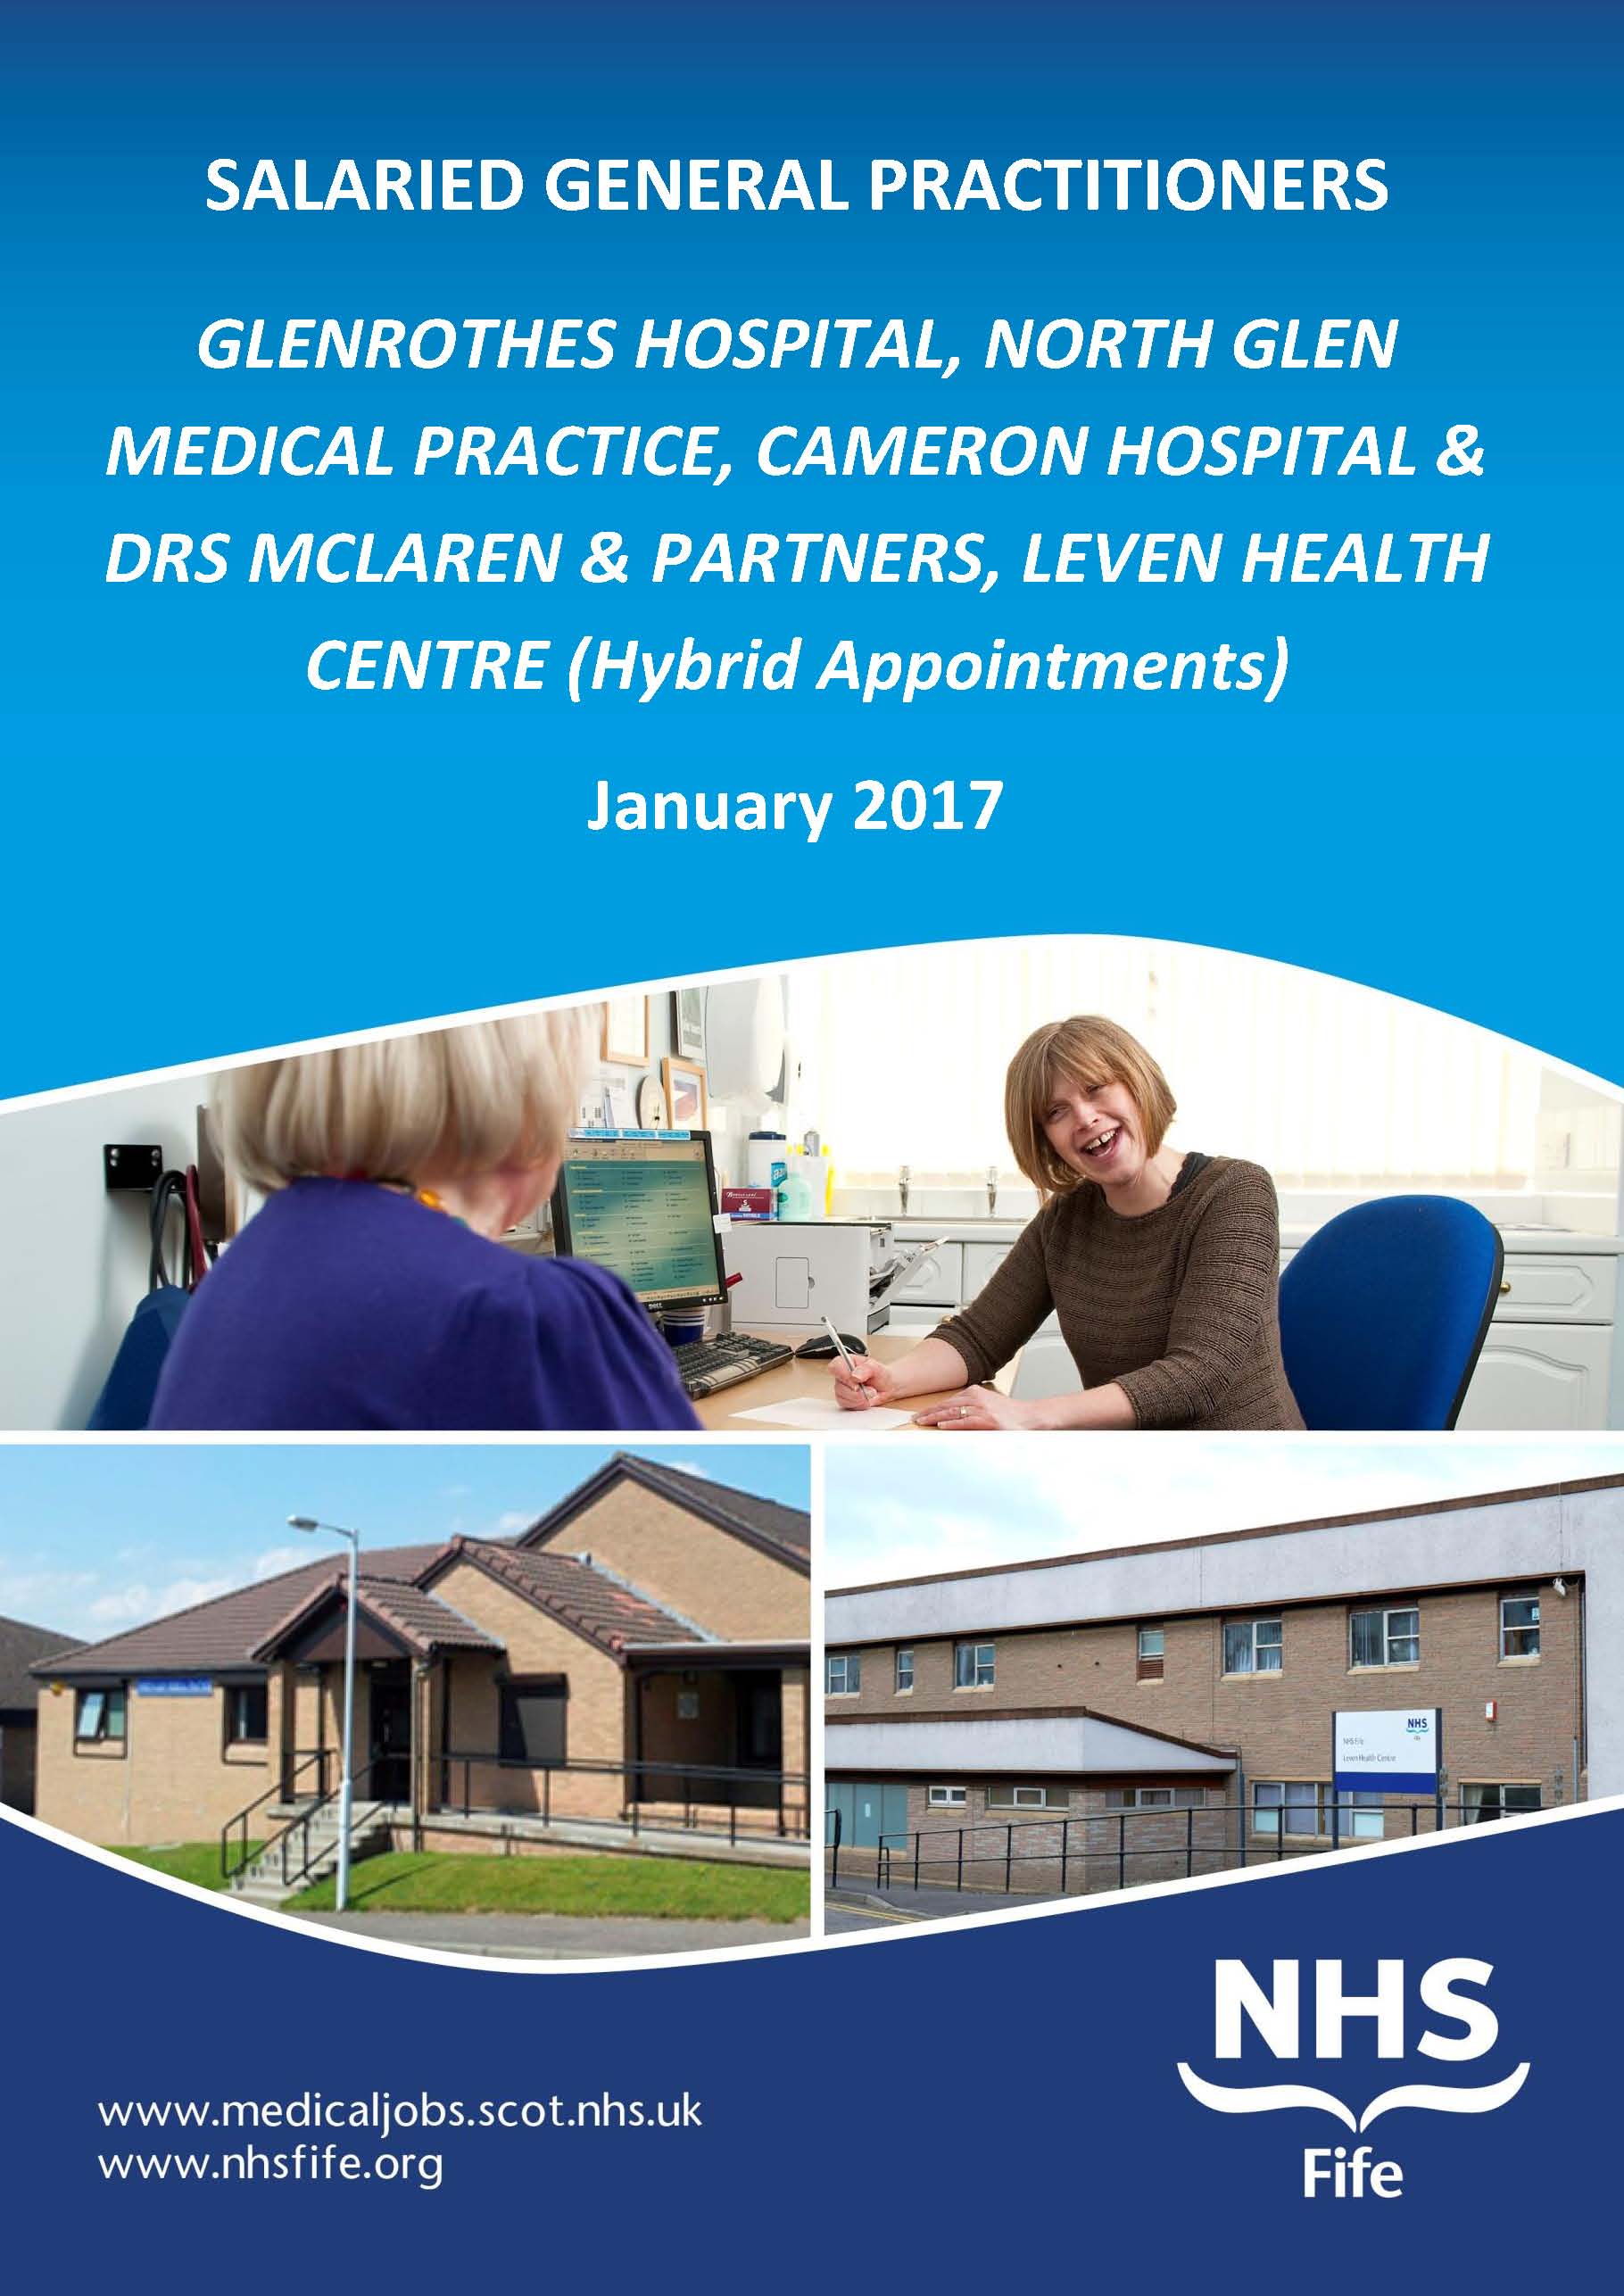 Screenshot of the front cover of the word document supplied by NHS Fife